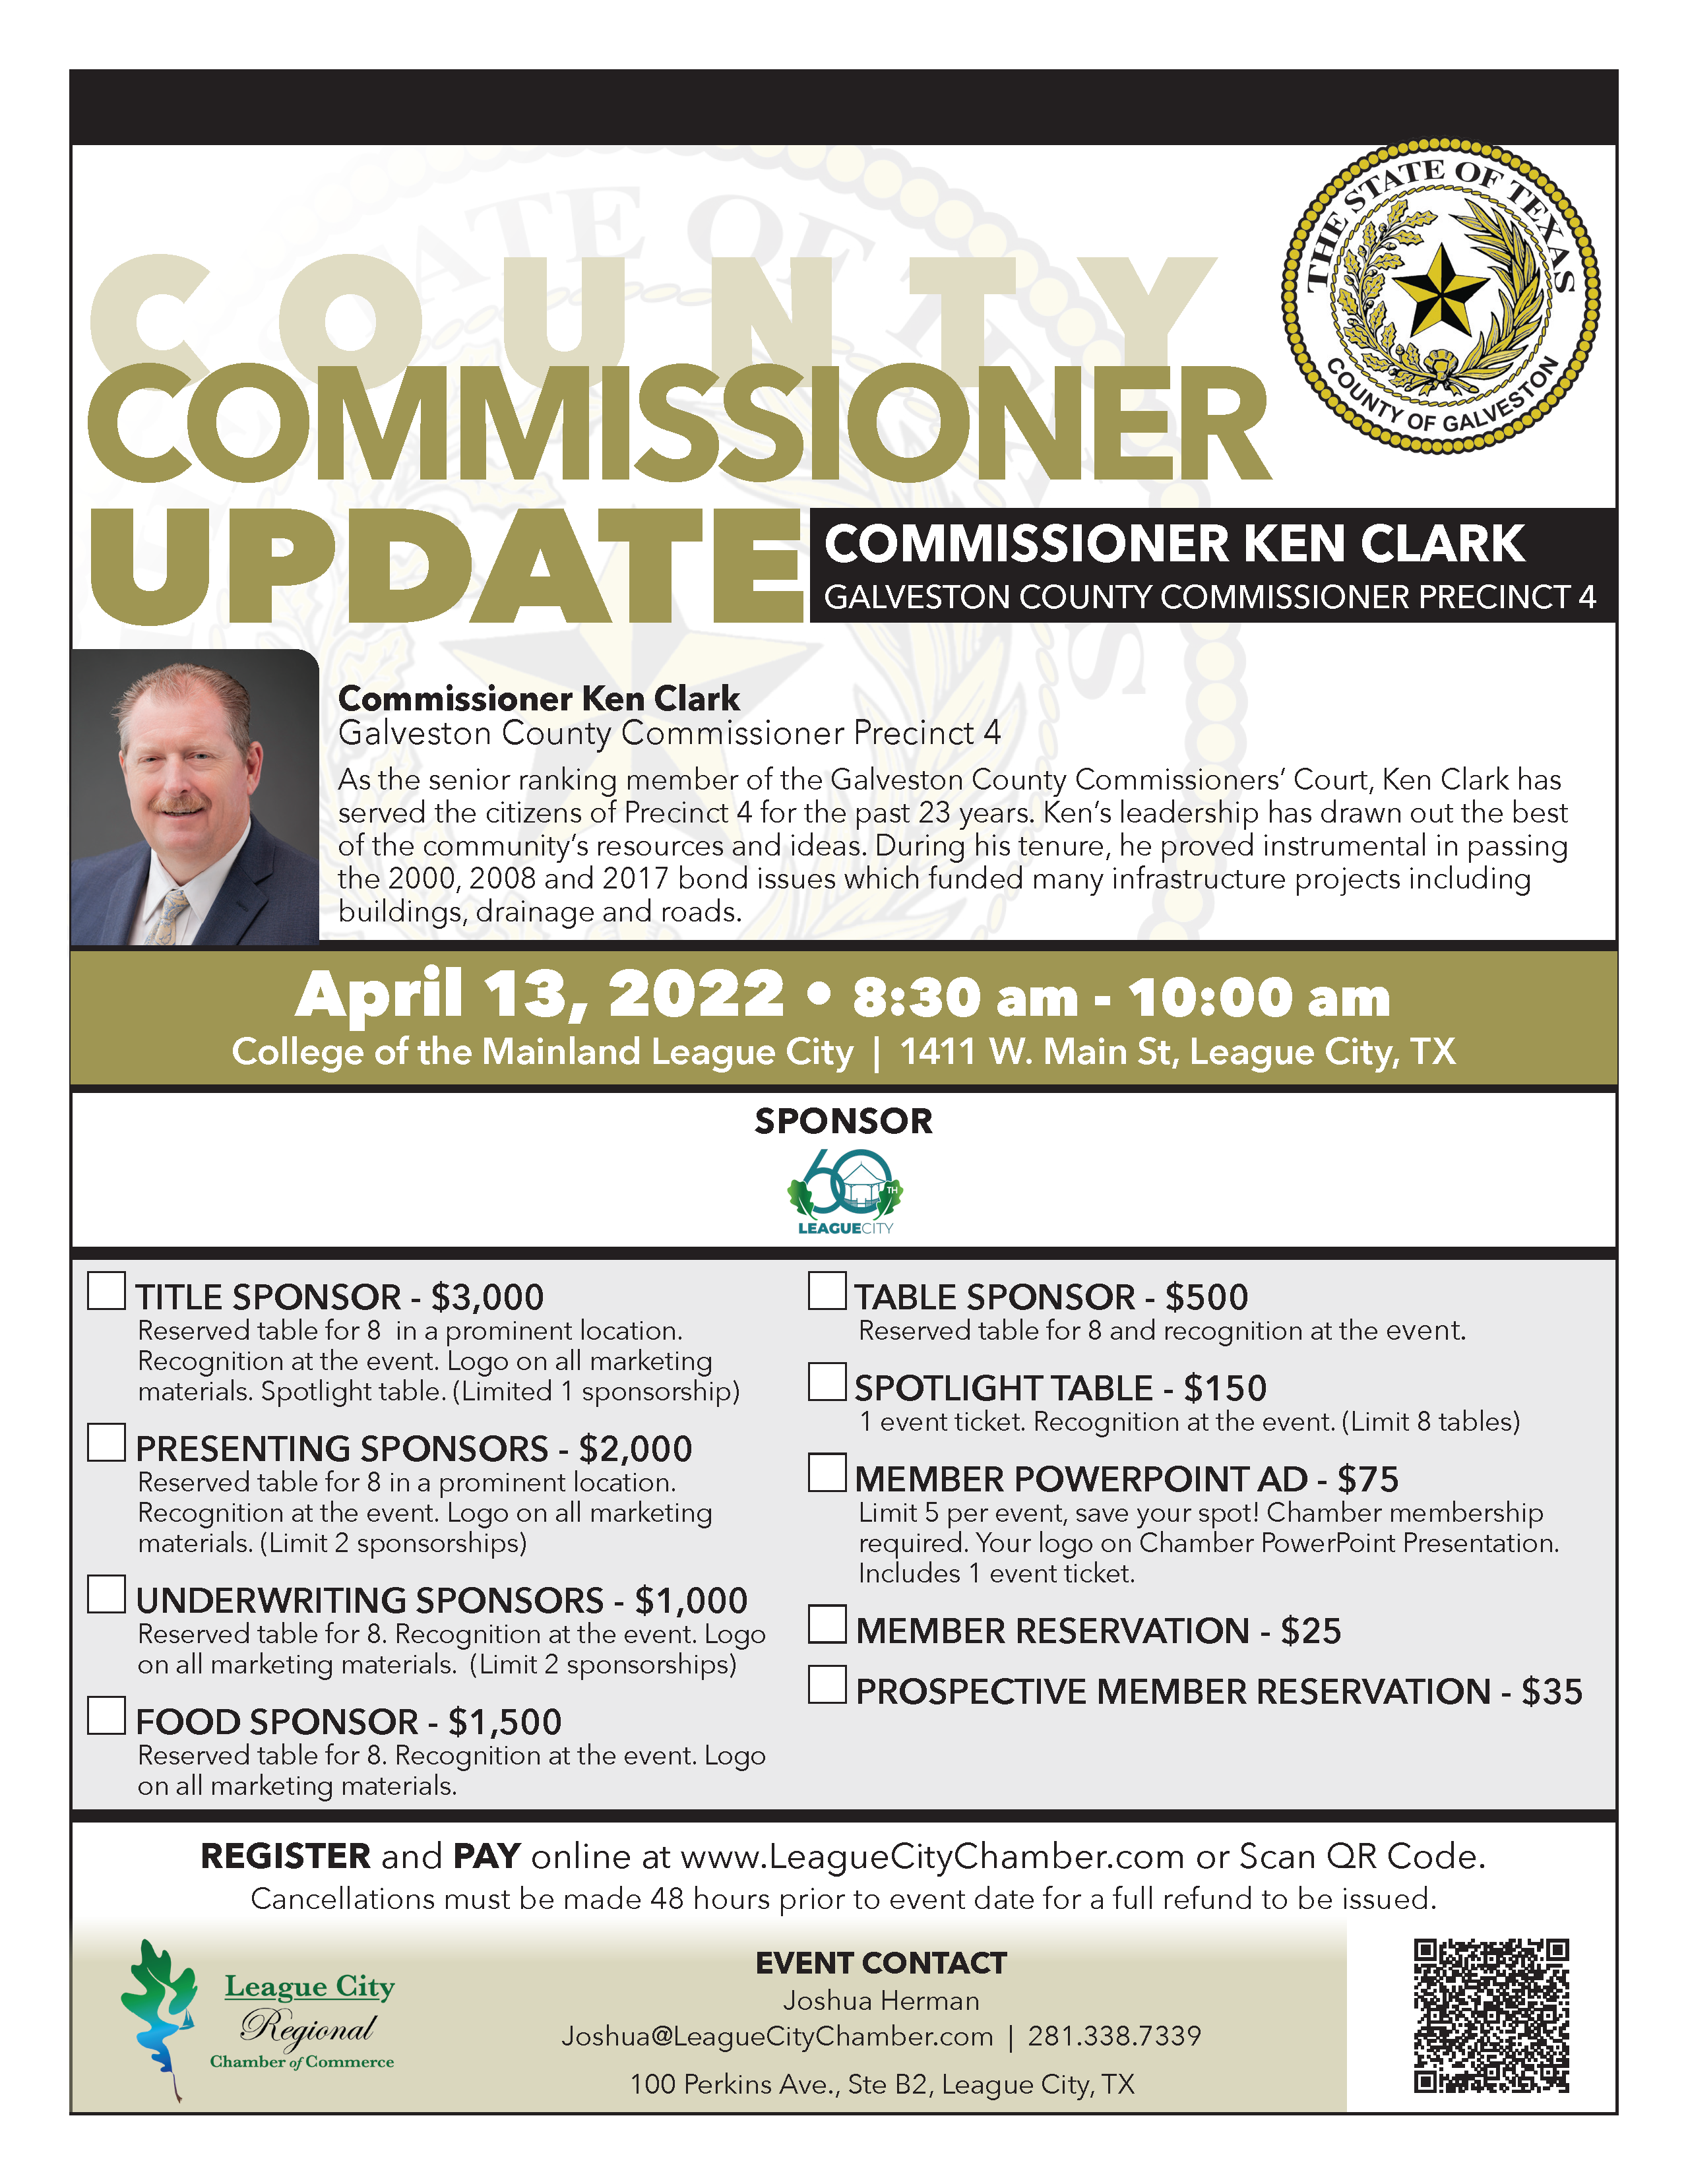 Image for NEWS RELEASE: League City Regional Chamber to host County Commissioner Update